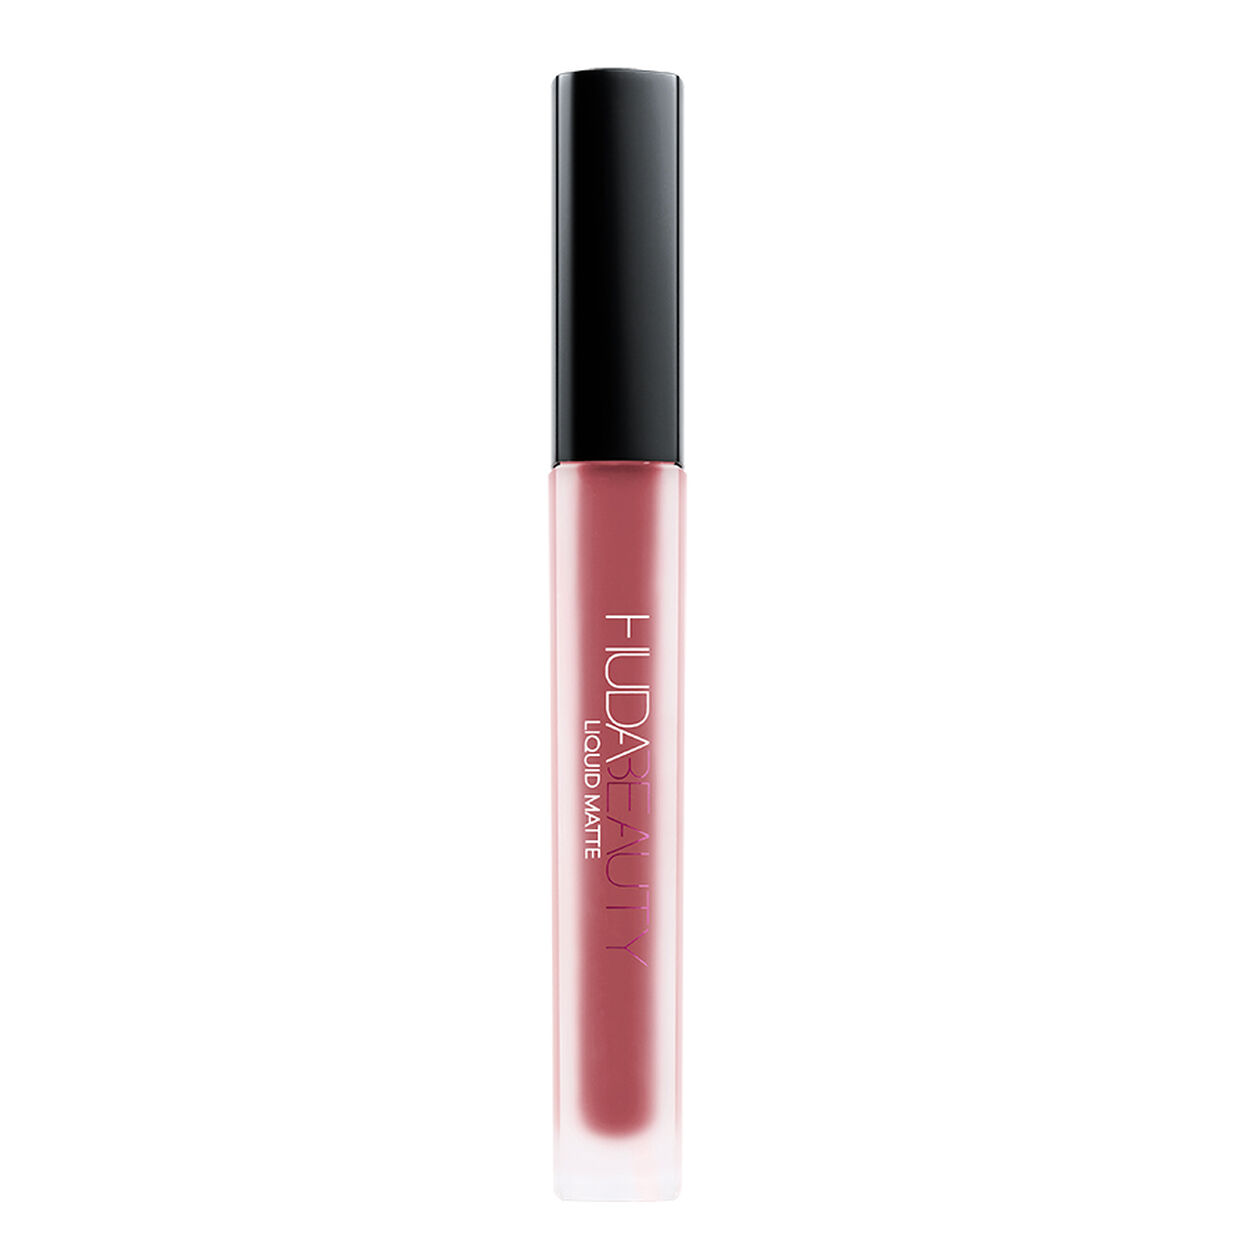 Shop Huda Beauty liquid lipstick in icon shade available at Heygirl.pk for delivery in Pakistan